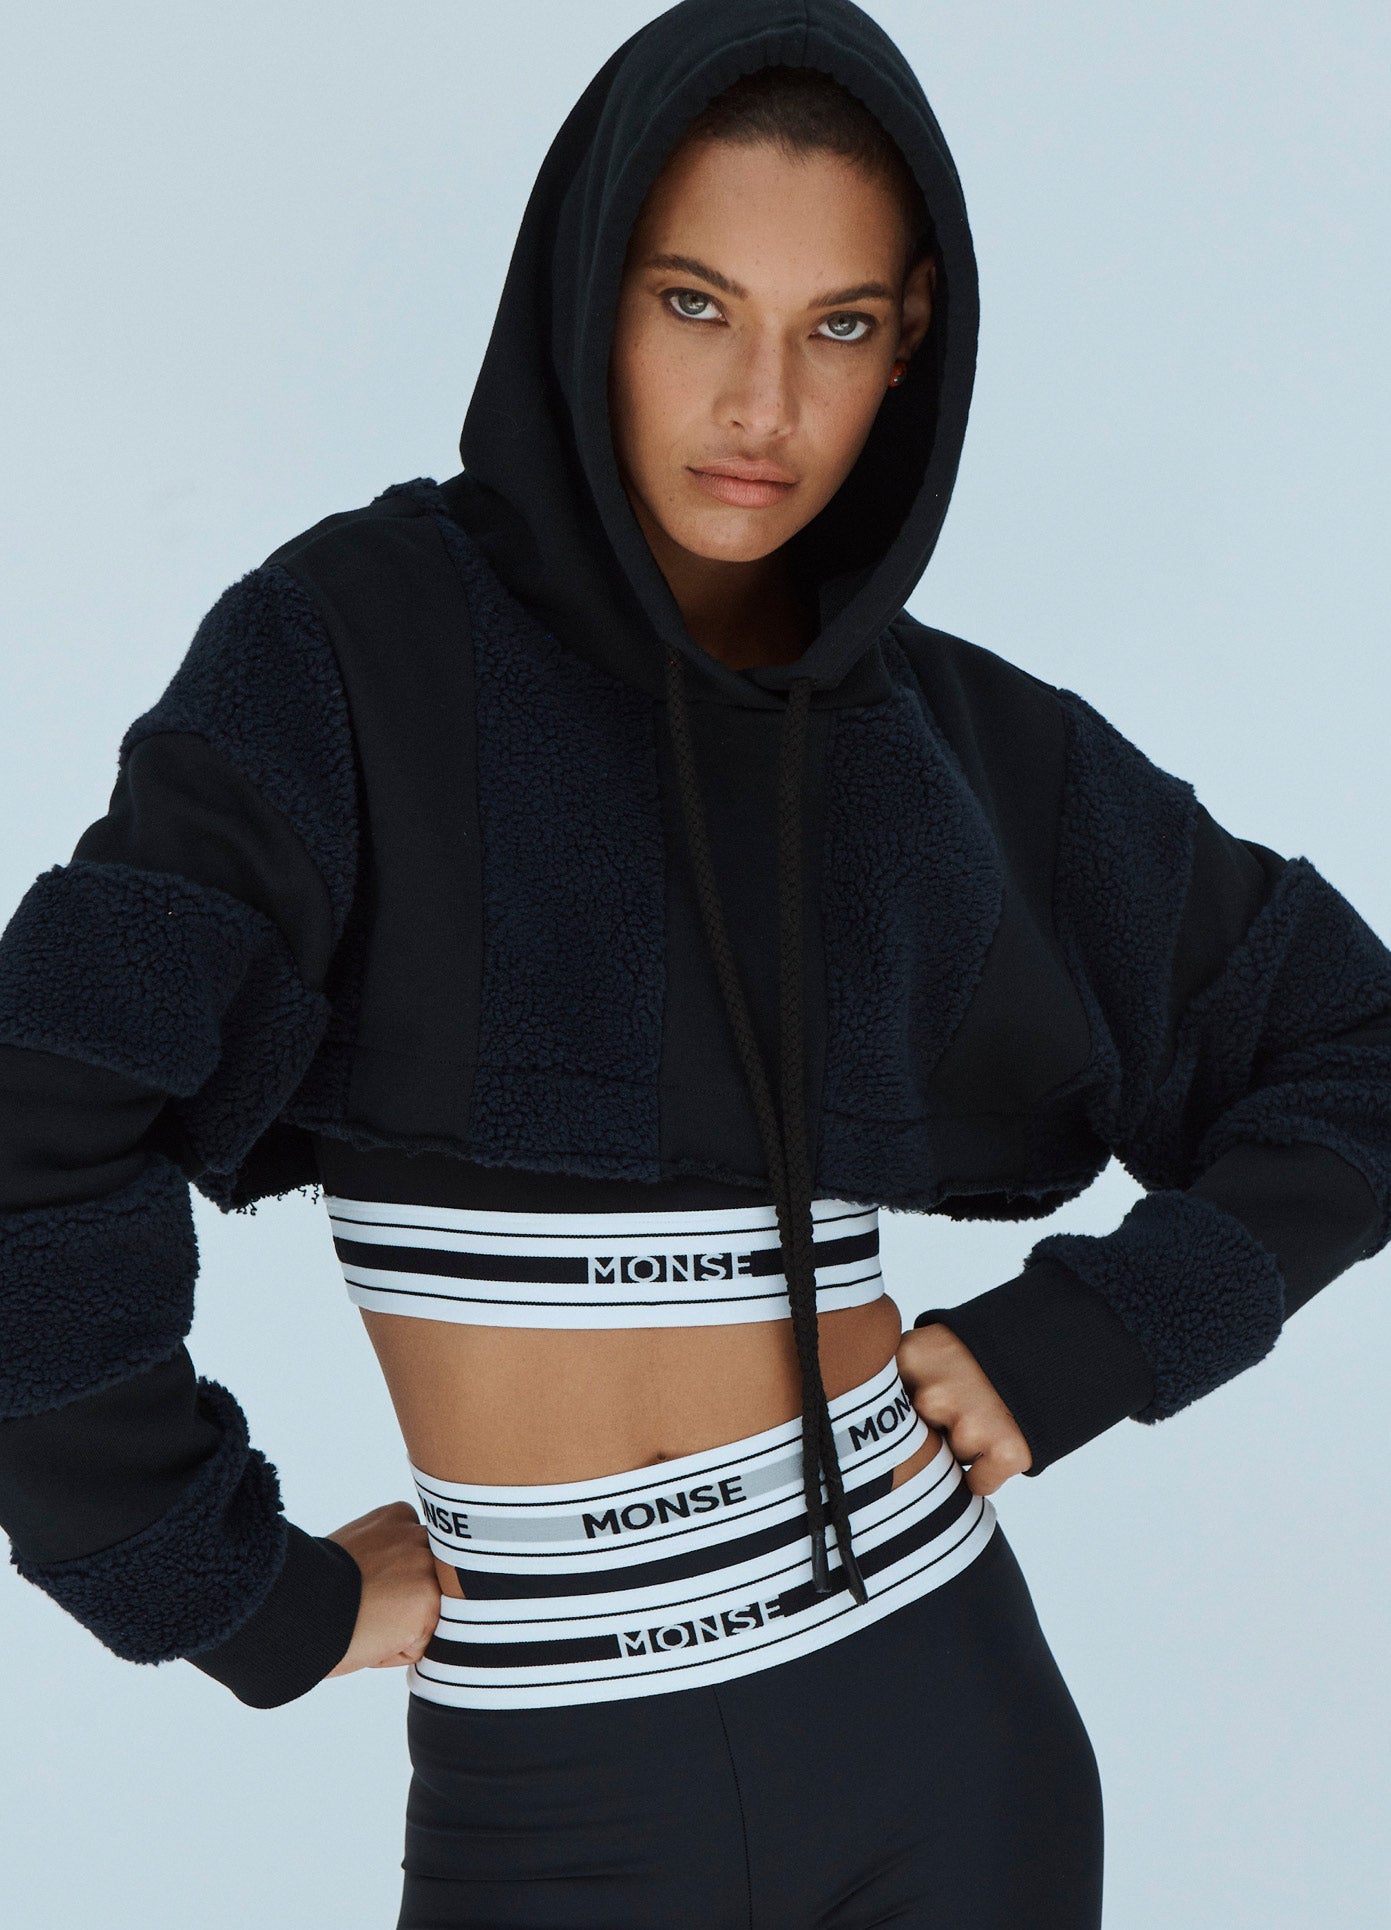 MONSE Cropped Hoodie in Black and Midnight on Model Front View